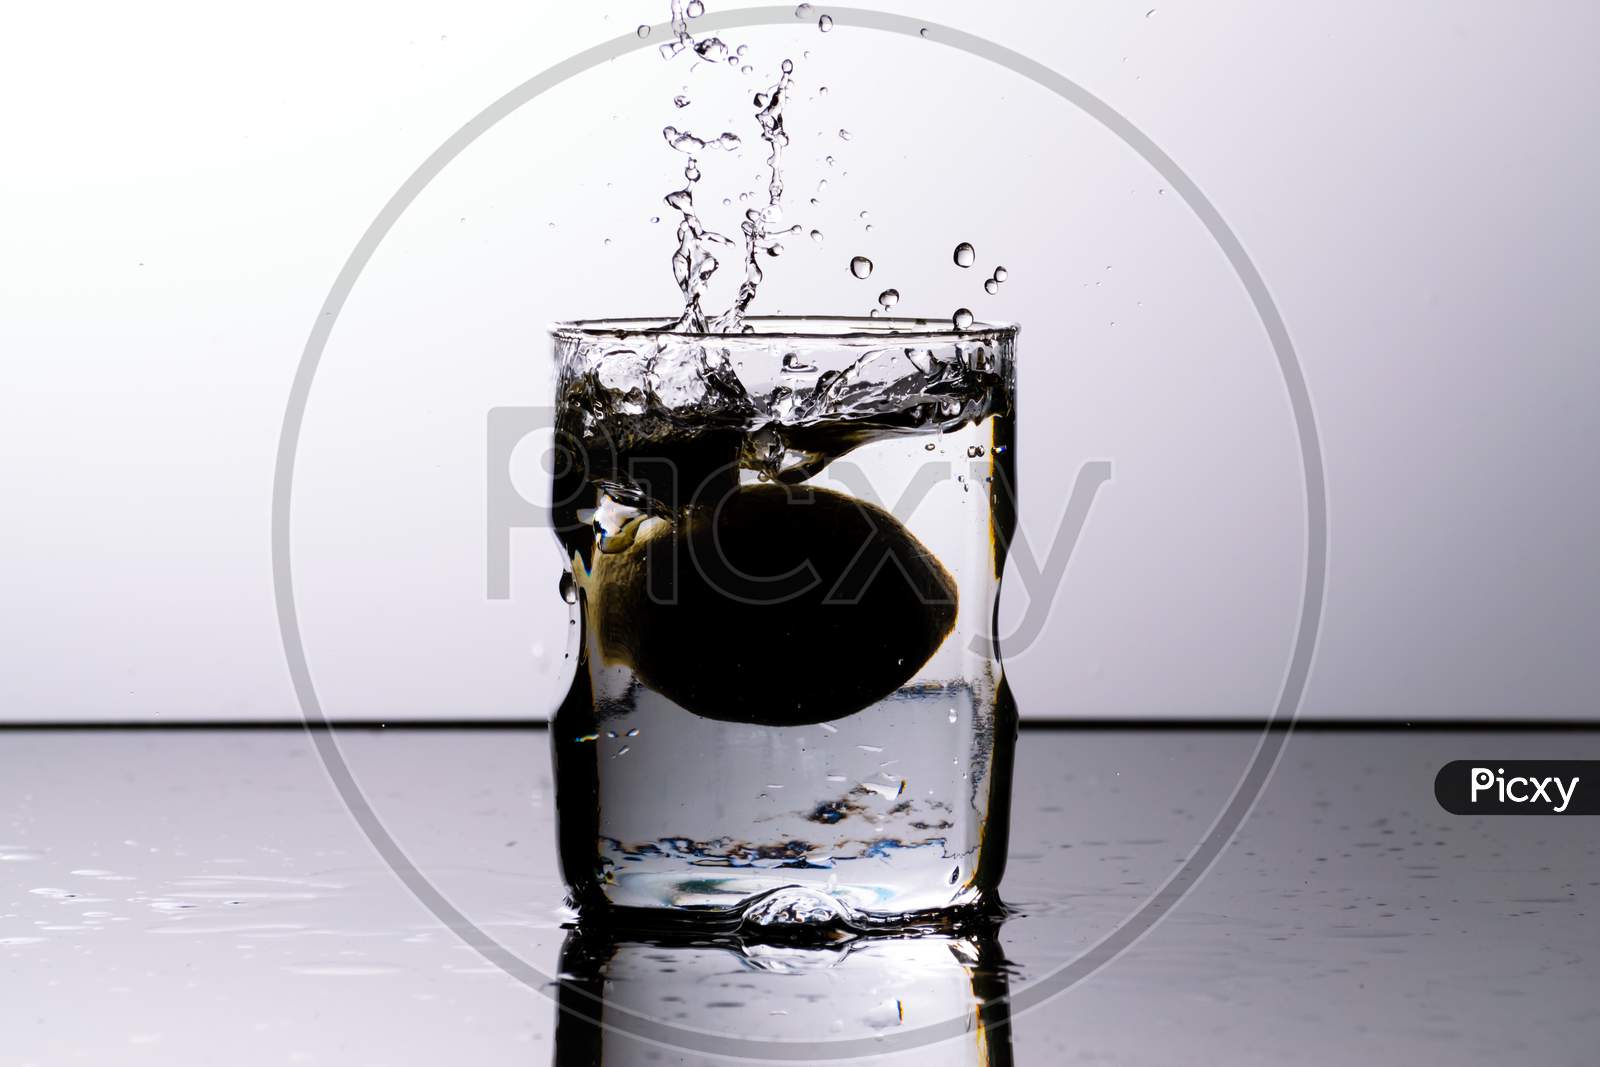 A Glass Of Water Placed On A Reflective Surface With White Background And Water Is Splashing After Dropping A Lemon In The Glass